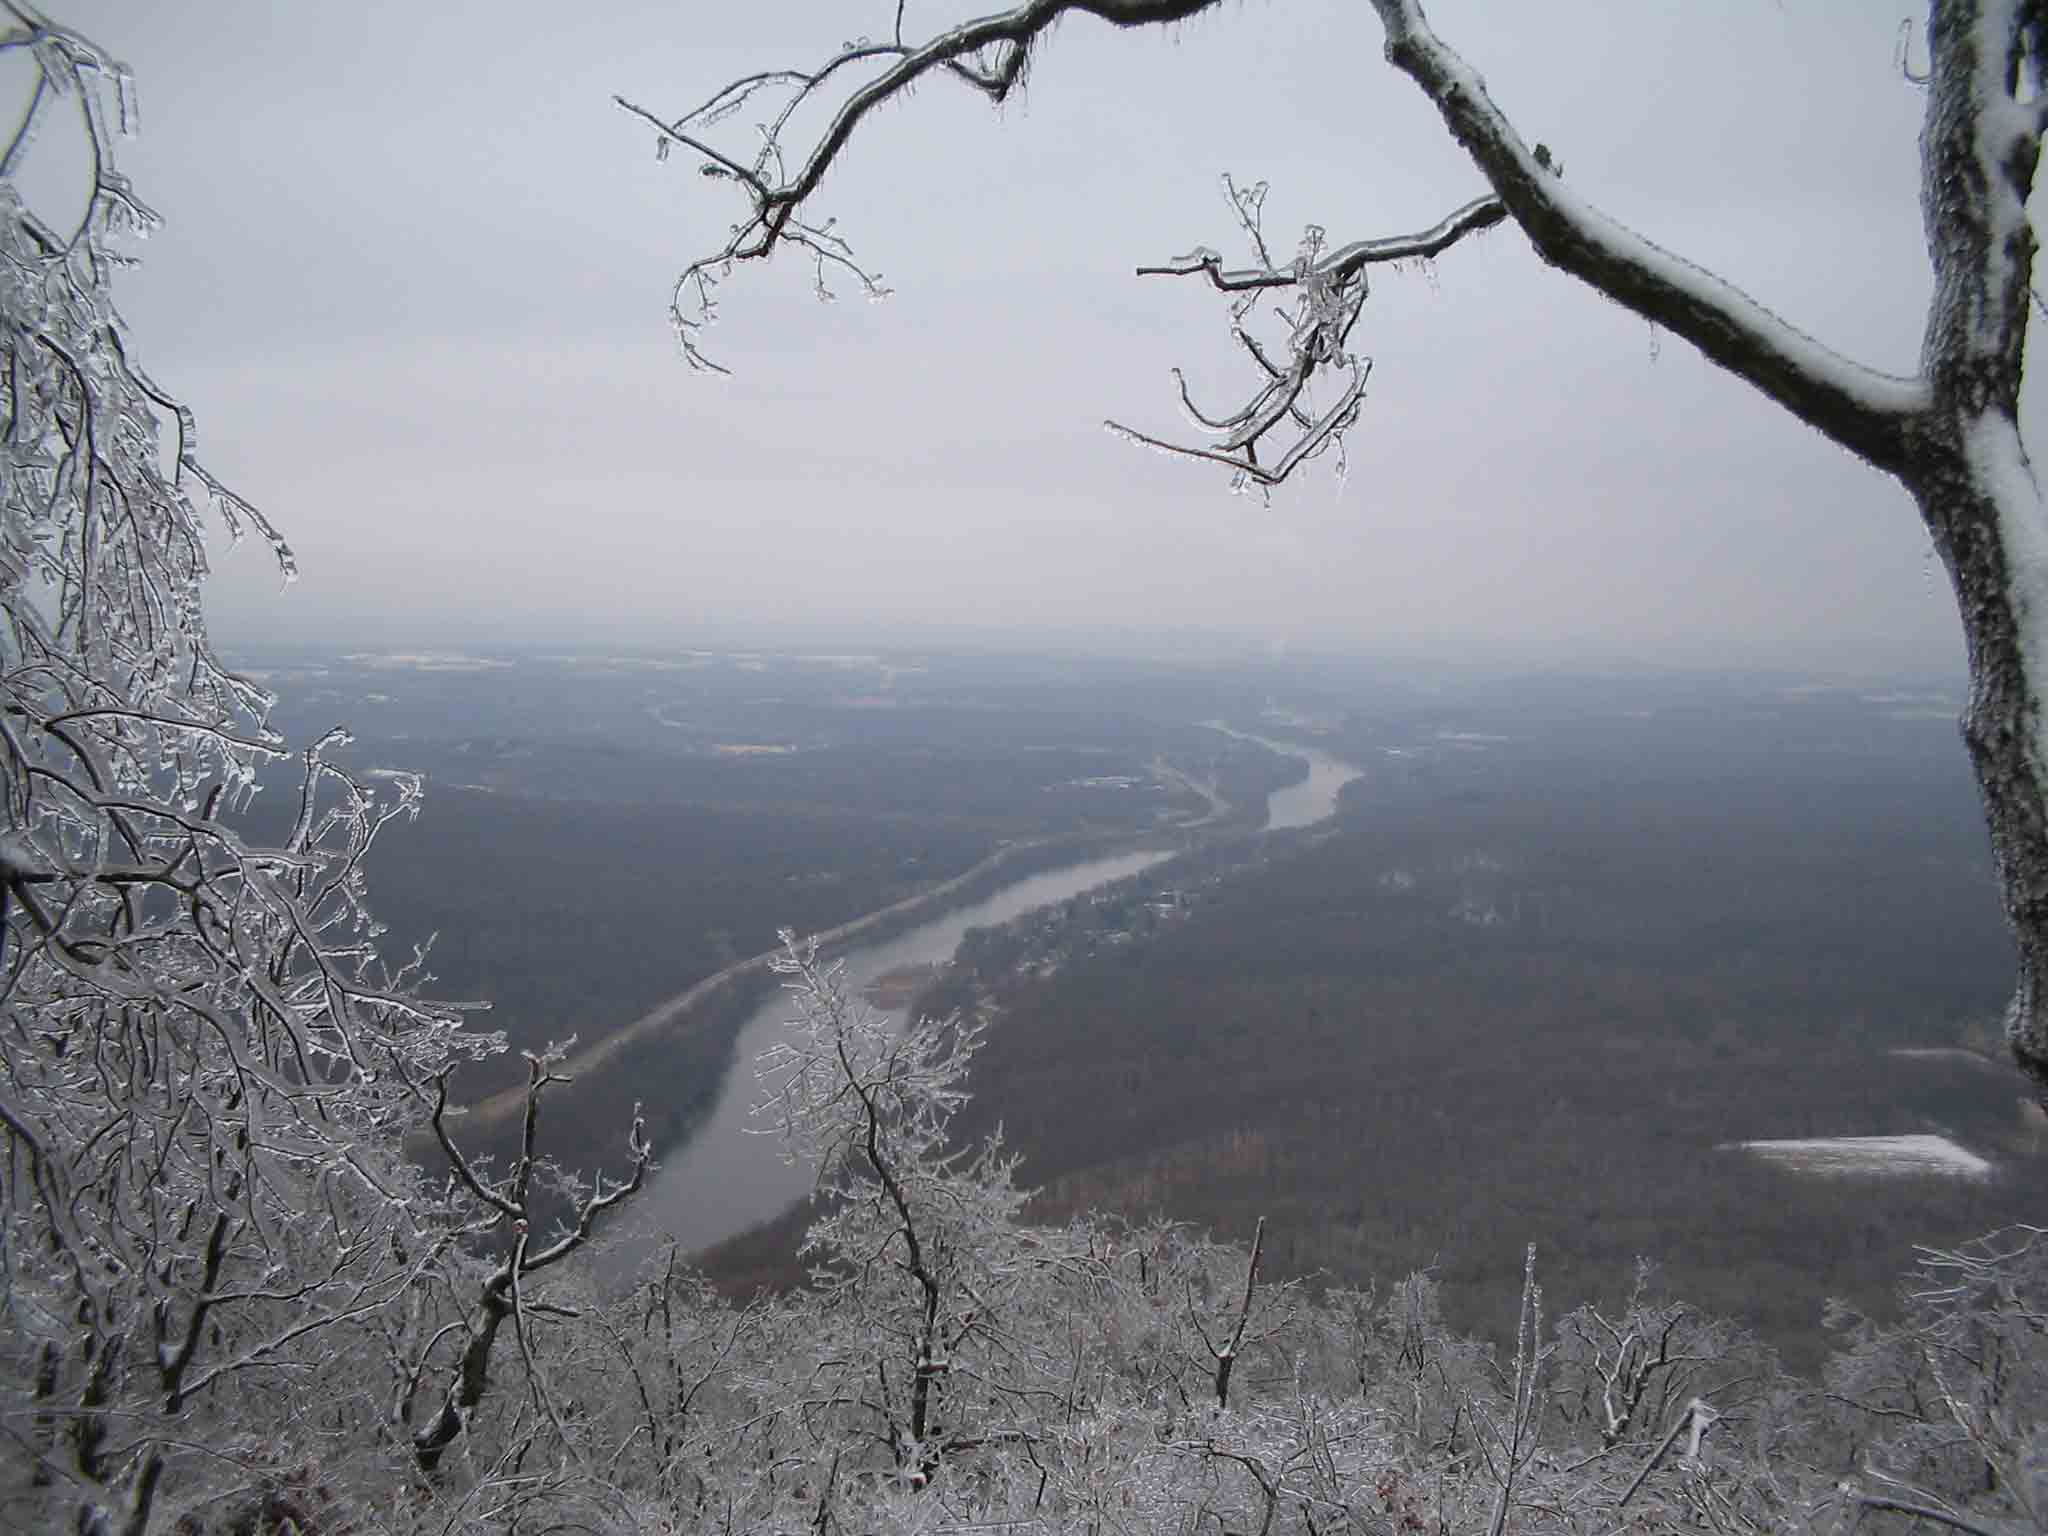 mm 2.8 - Overlook near the summit of Mt. Minsi, PA AT.  Courtesy Butter03@comcast.net